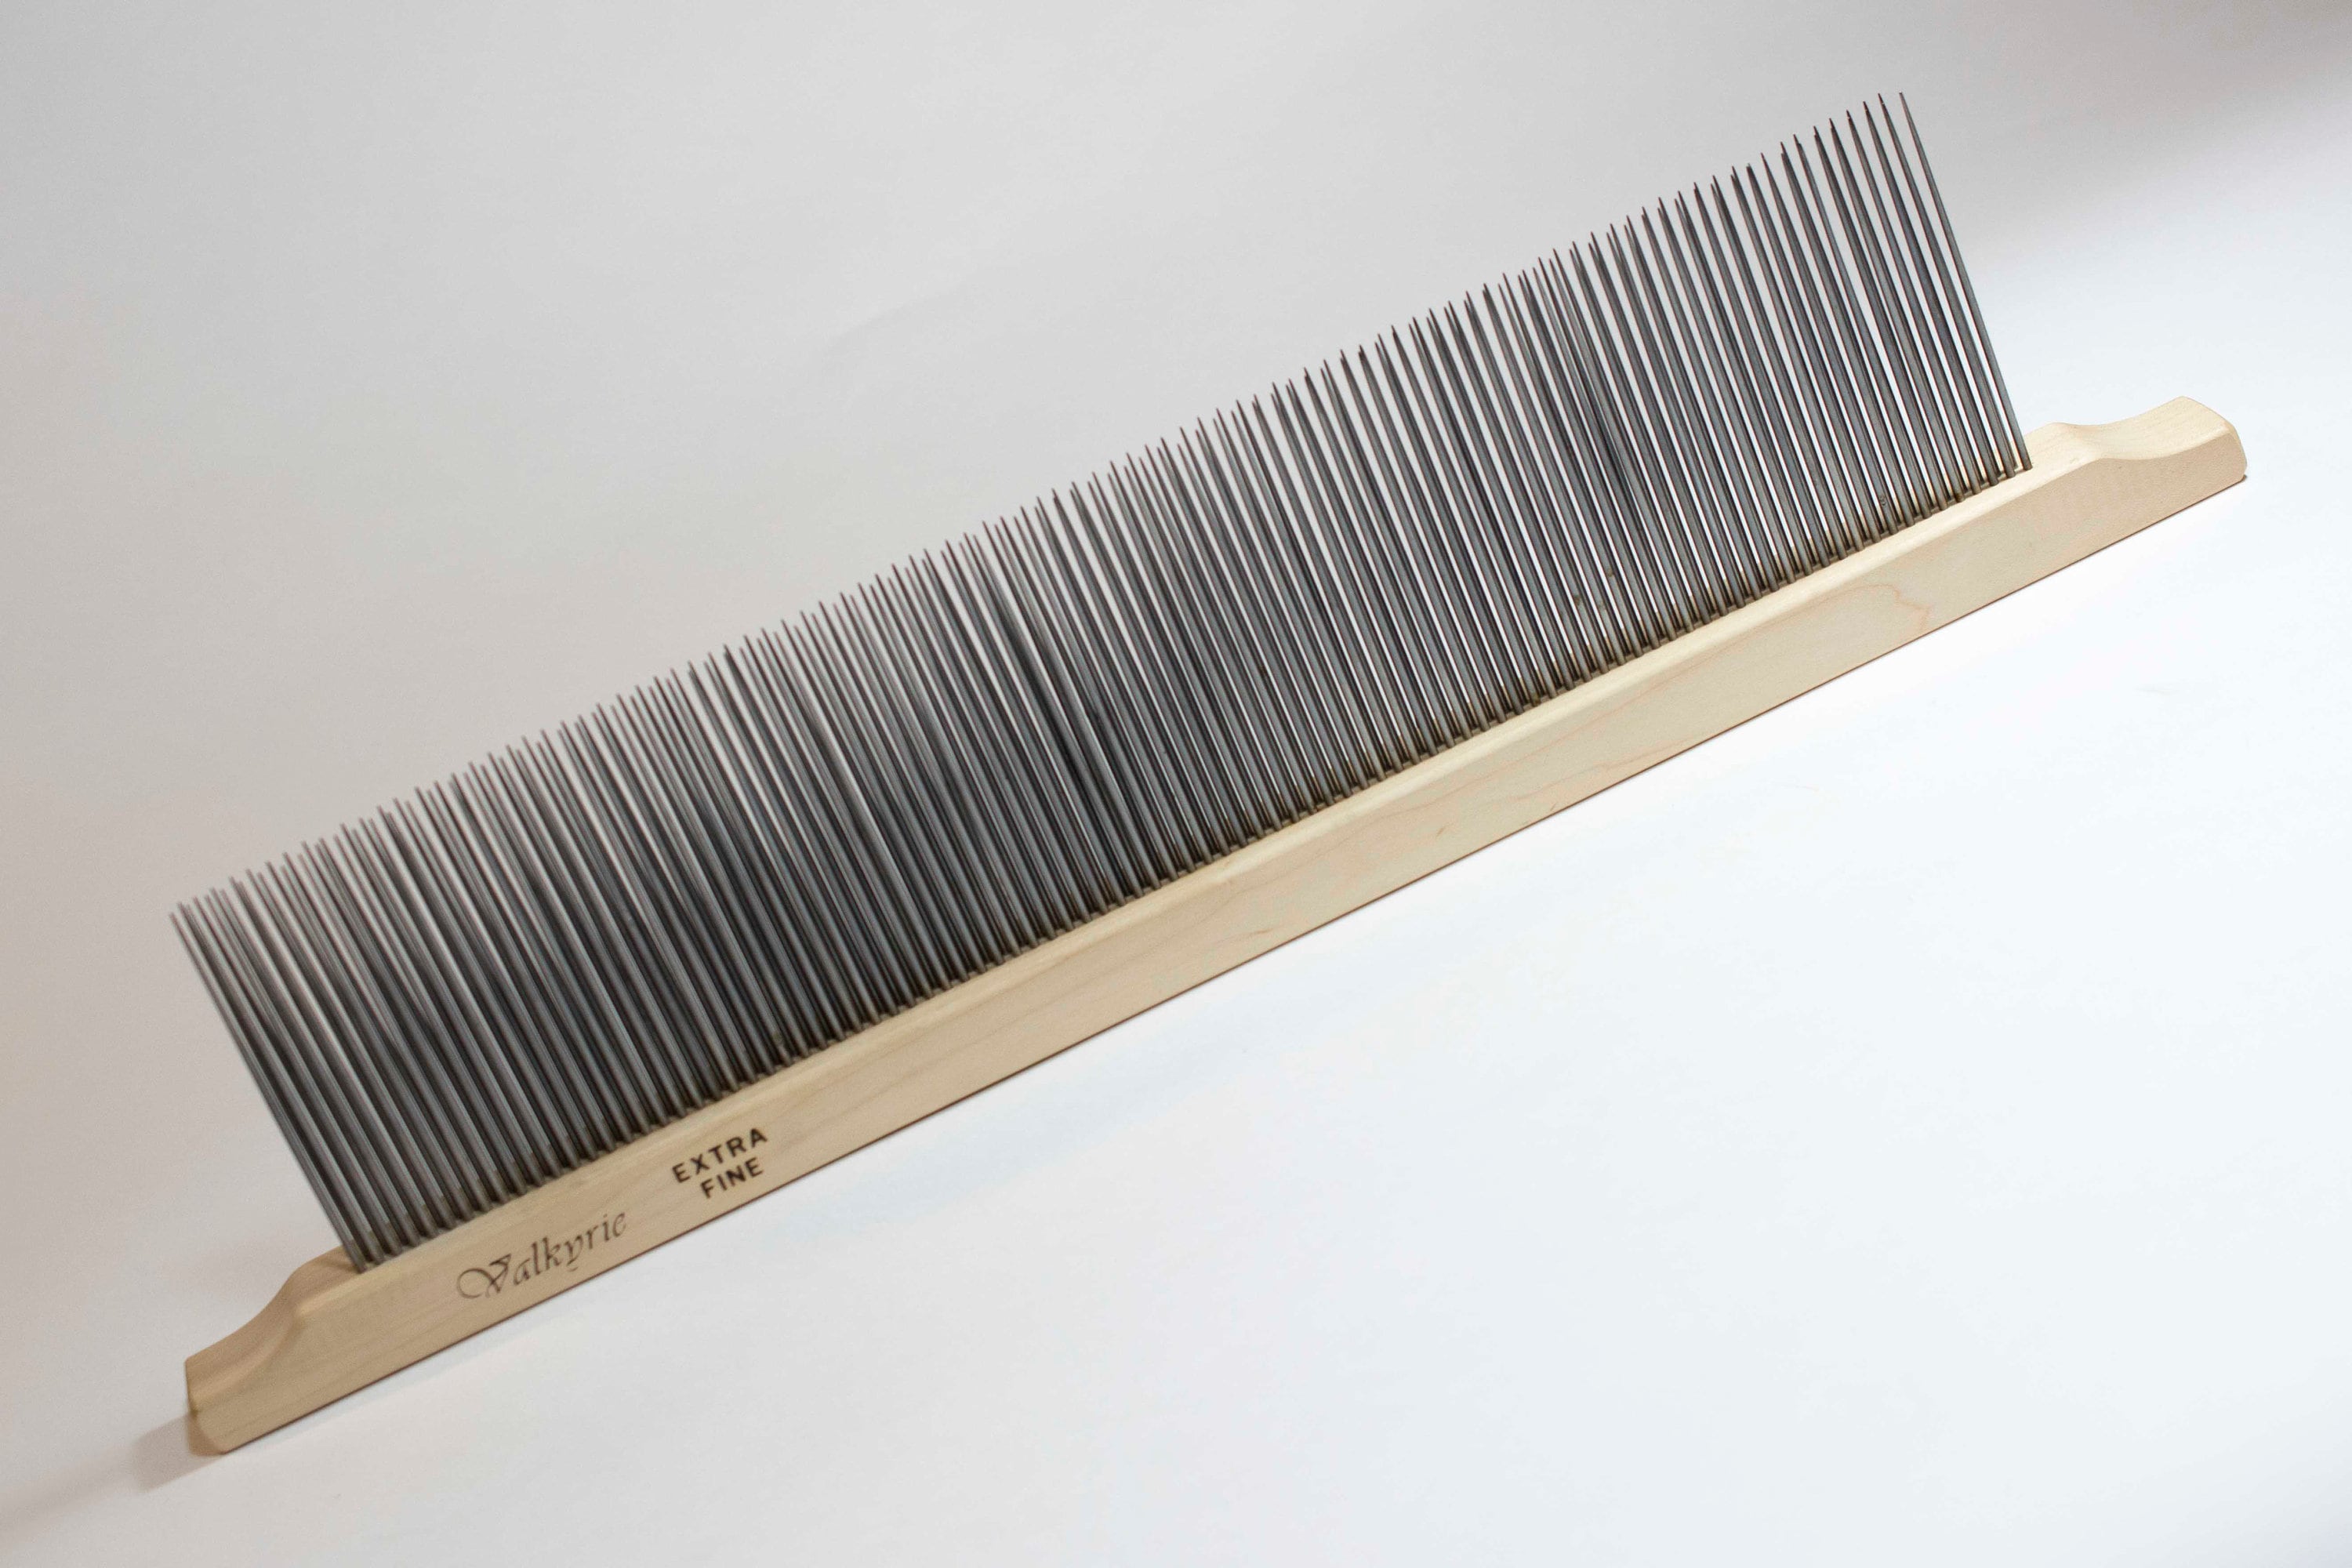 Regular Wool Combs- Single or Double Row - Fine or Extra Fine